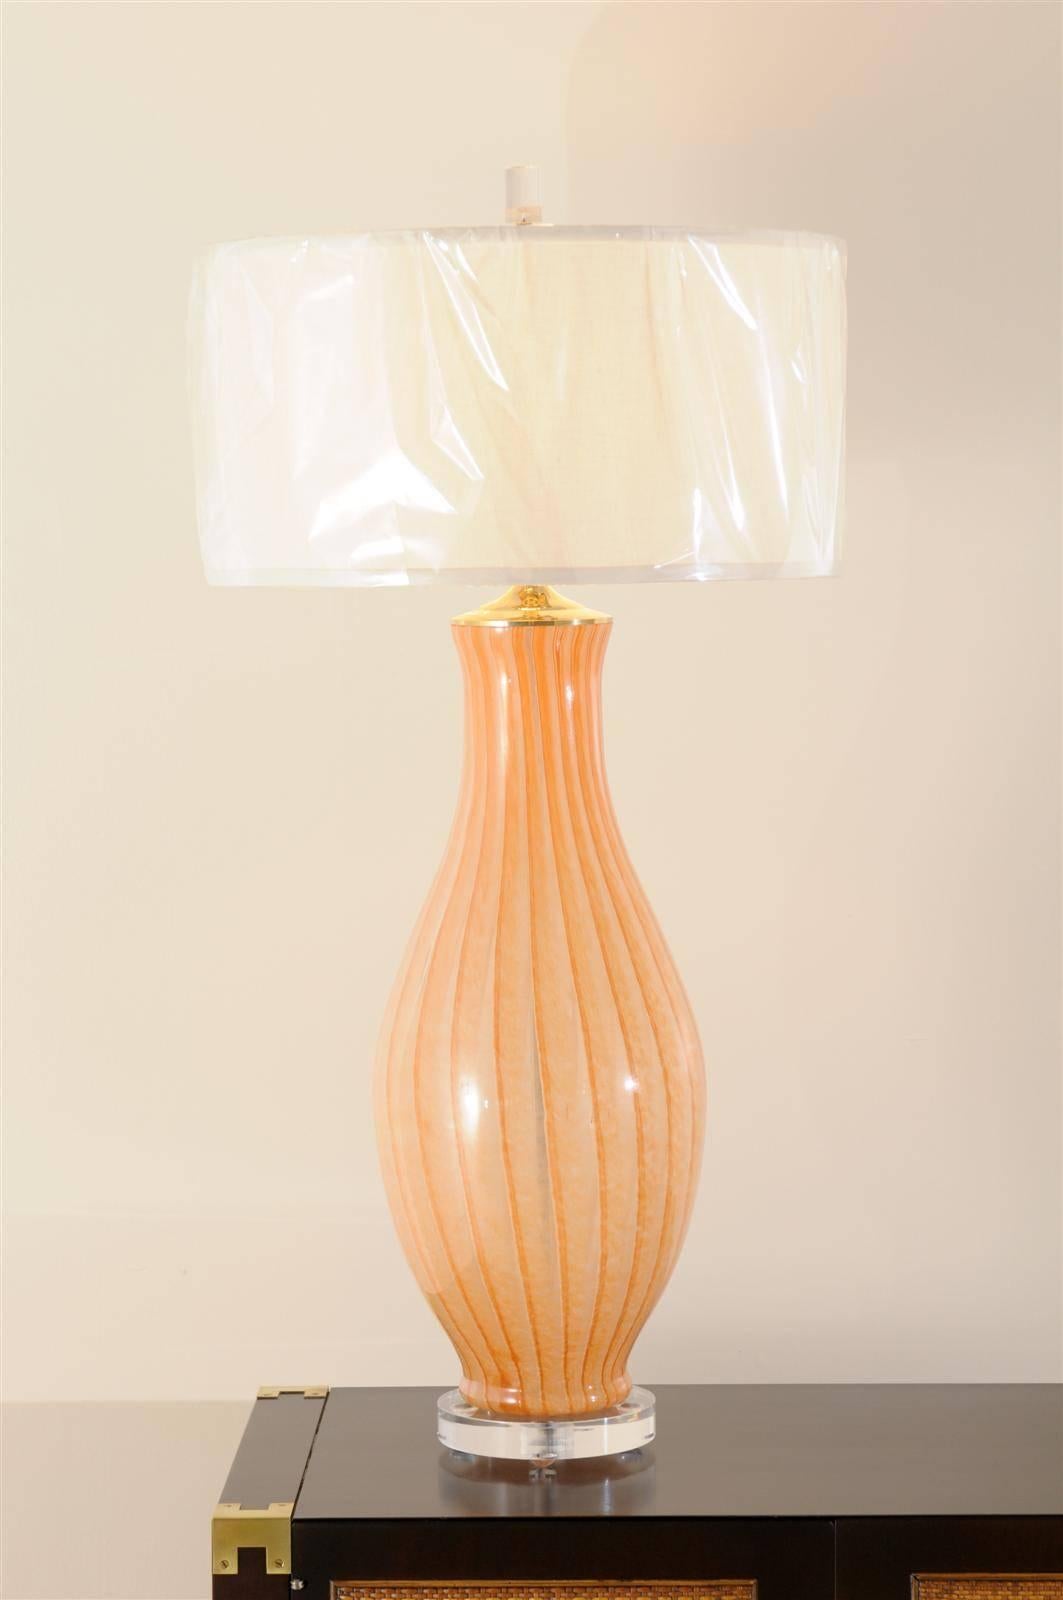 A beautiful pair of monumental vintage blown Murano lamps, circa 1970. Exquisite form and color. Stunning Jewelry! Excellent restored condition. The lamps have been rewired using clear cord and are on a new Lucite base. Complete with new neutral